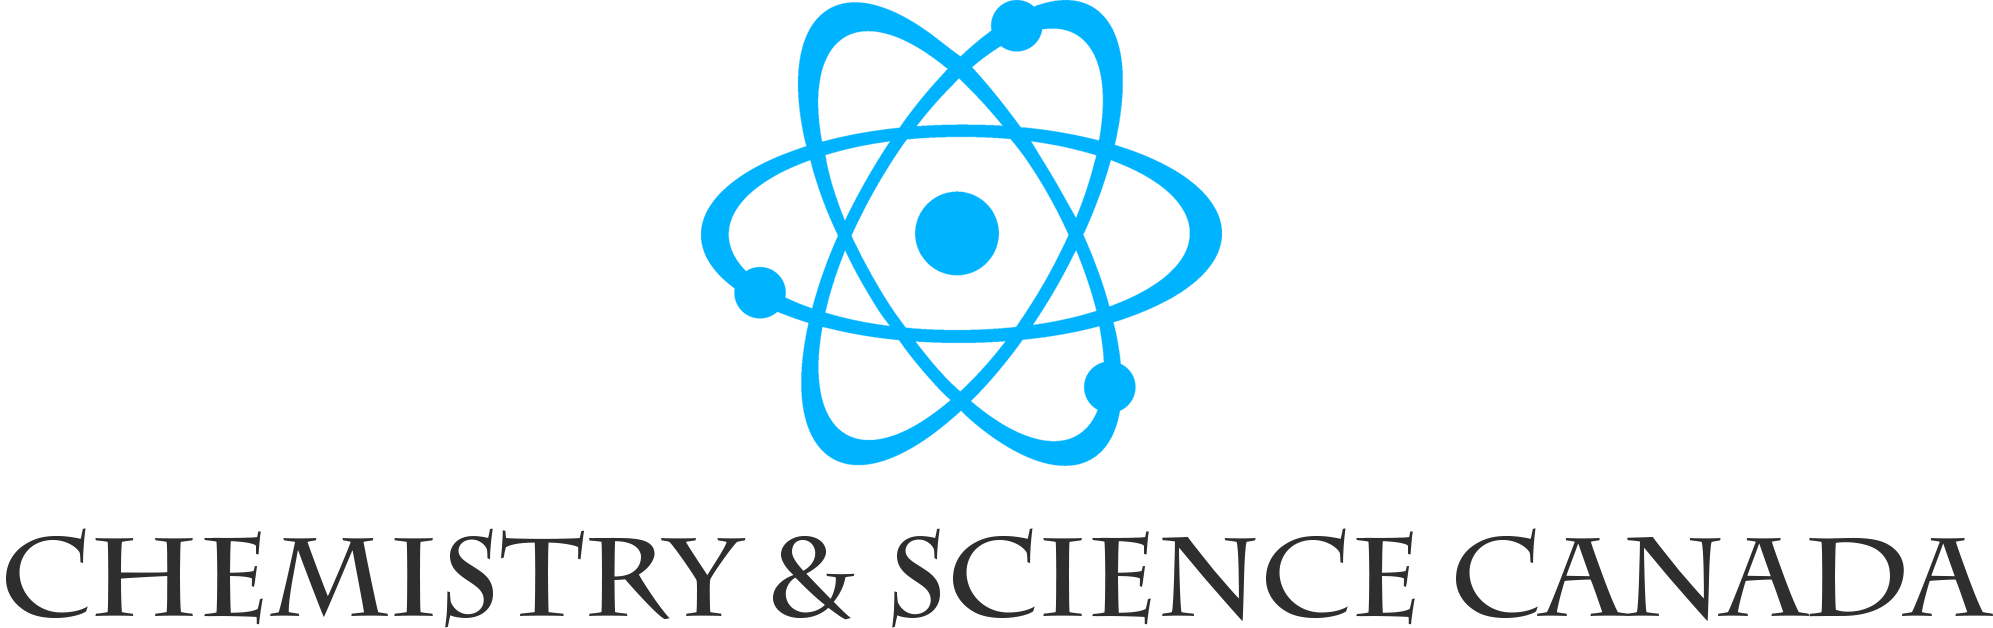 Chemistry & Science Canada